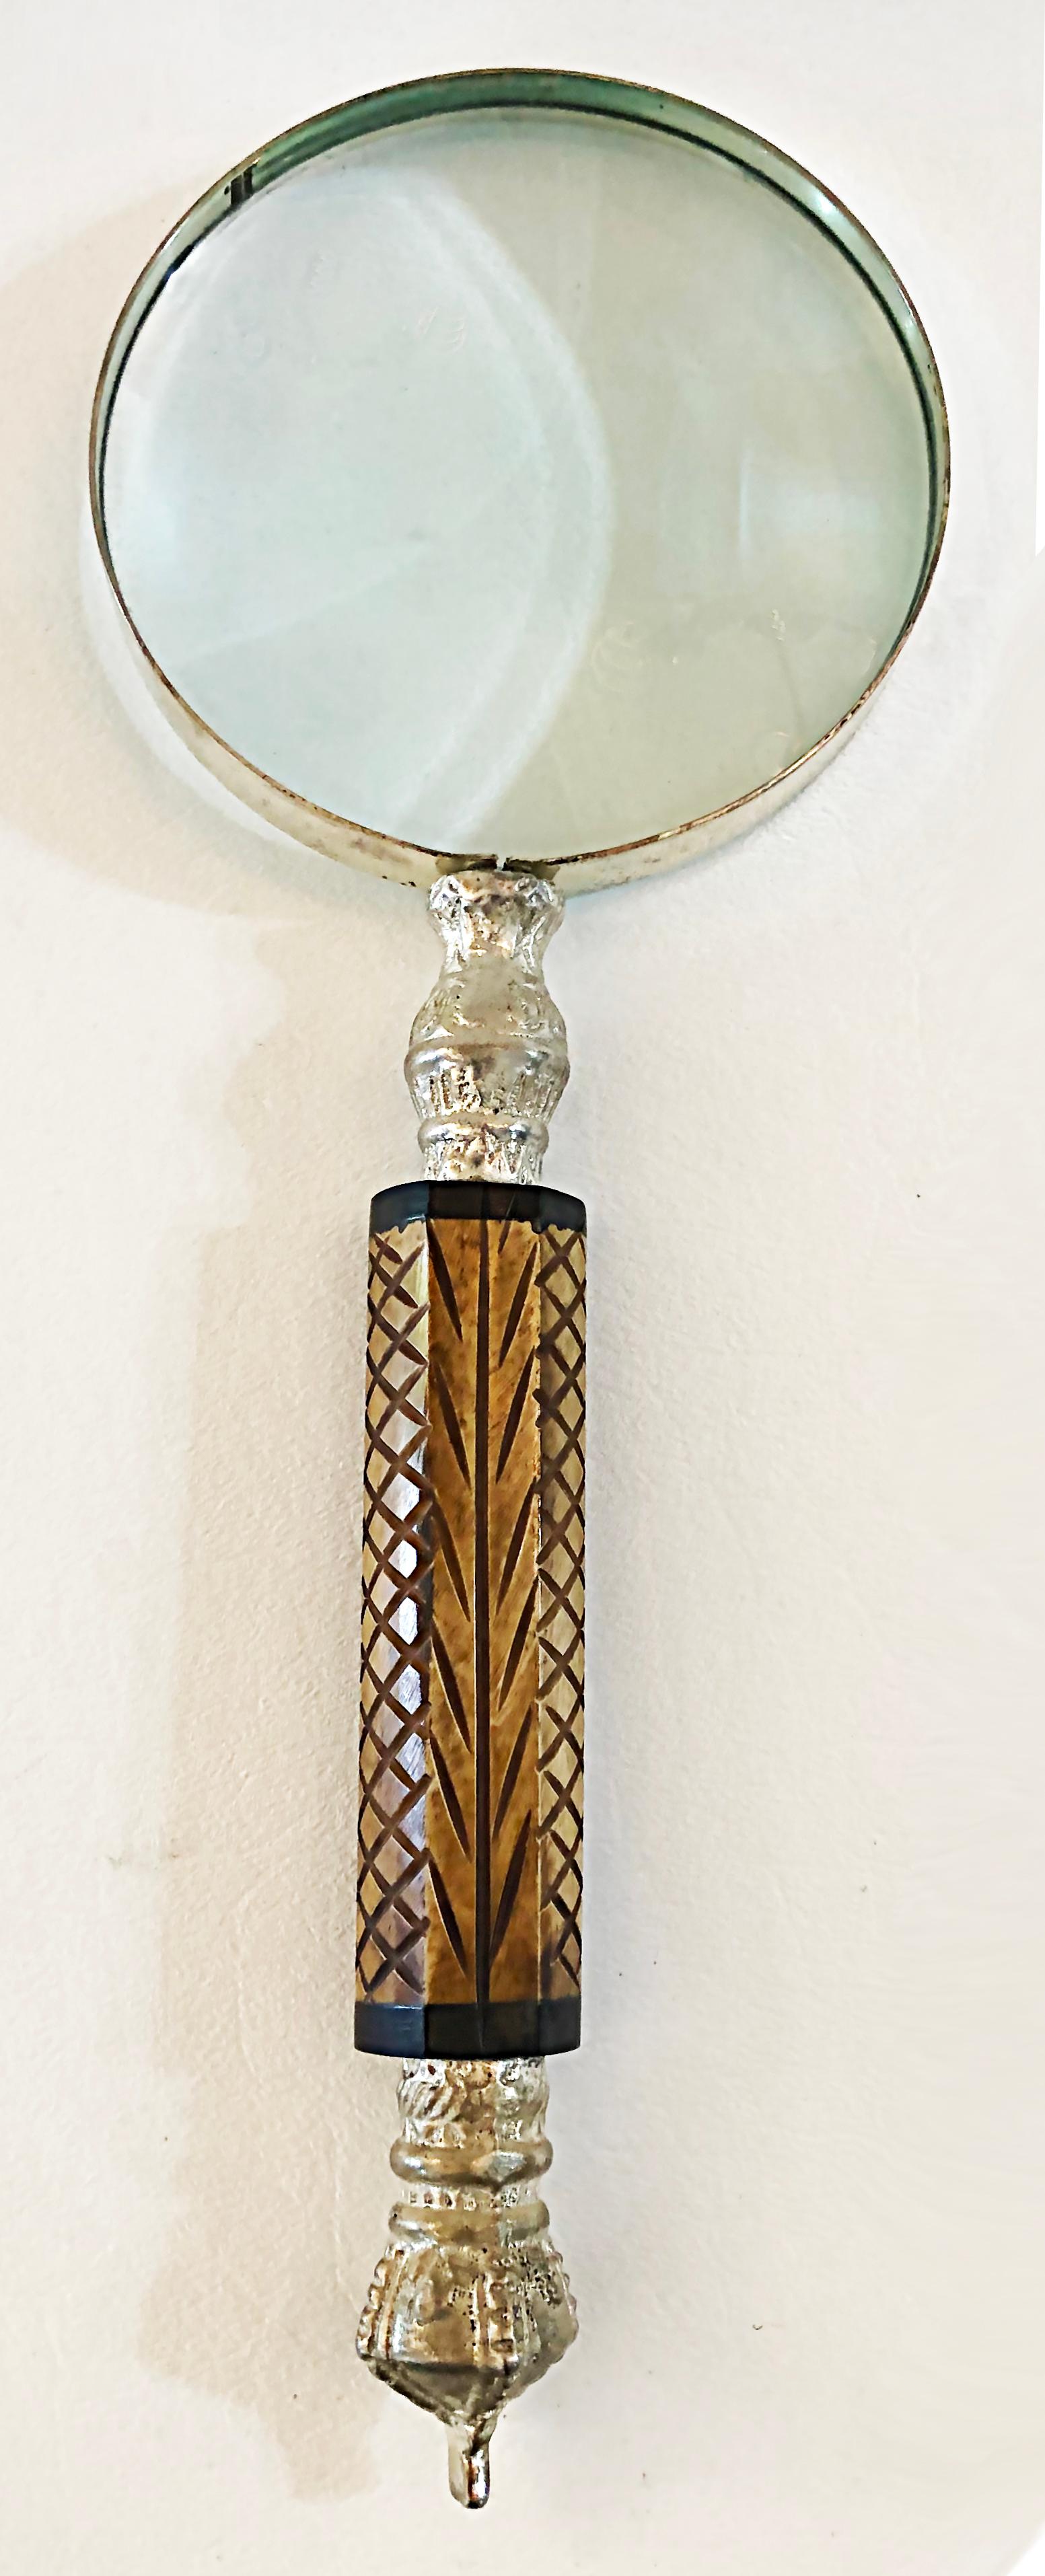 Vintage Magnifying glass with carved bone handle

Offered for sale is a vintage 20th-century magnify glass with a silver tone frame and a carved bone handle. The frame shows some vintage patina that adds to an antique look.